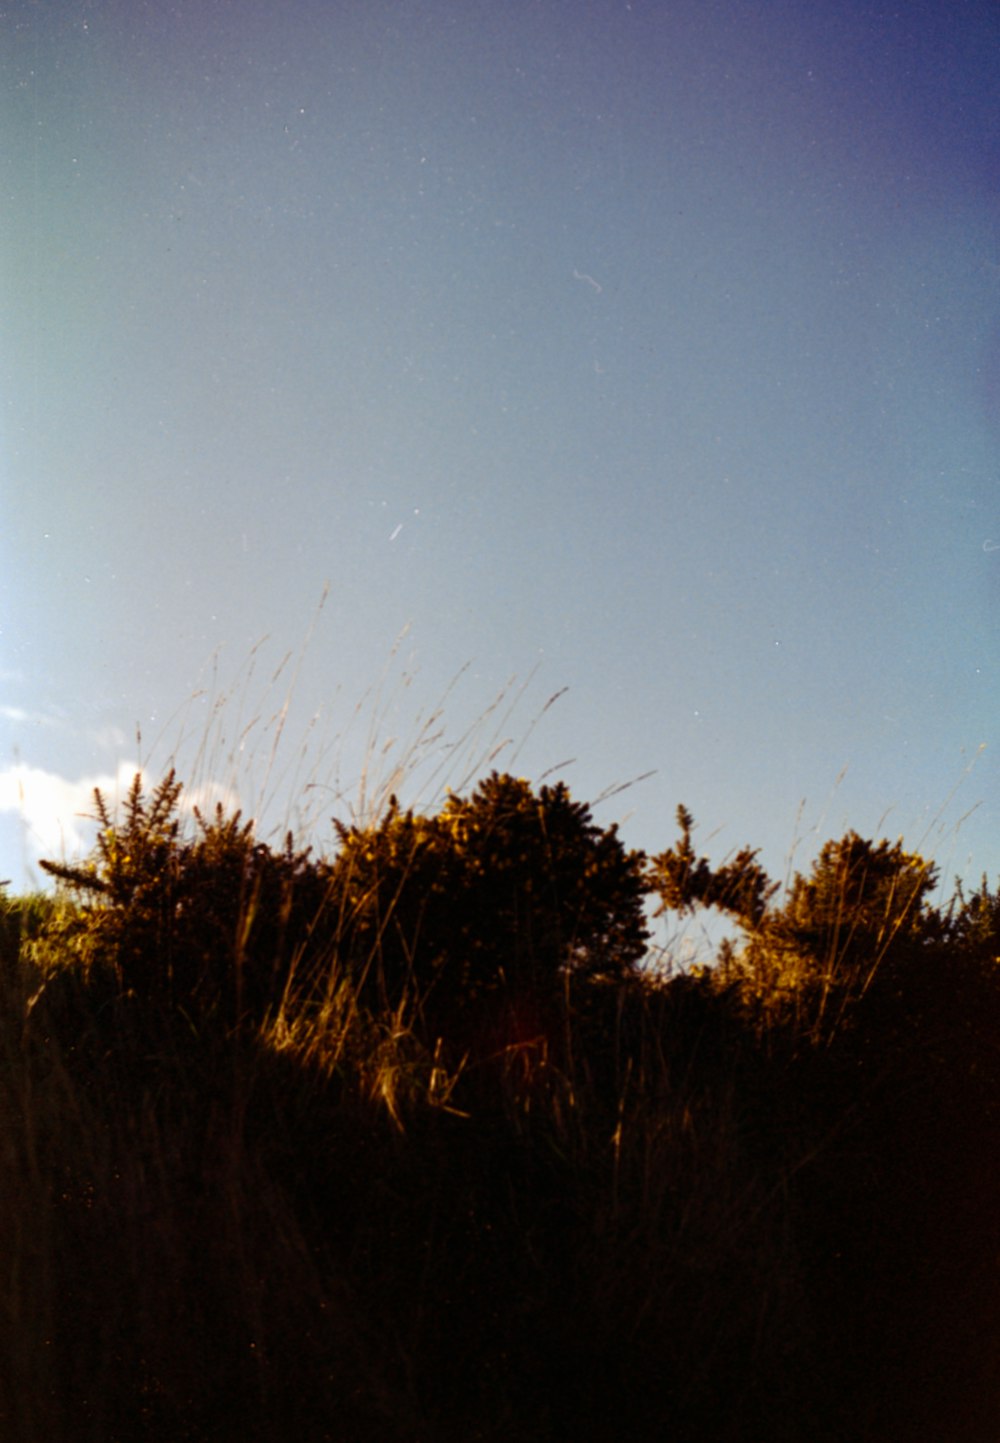 a view of the sky from the ground of a grassy area